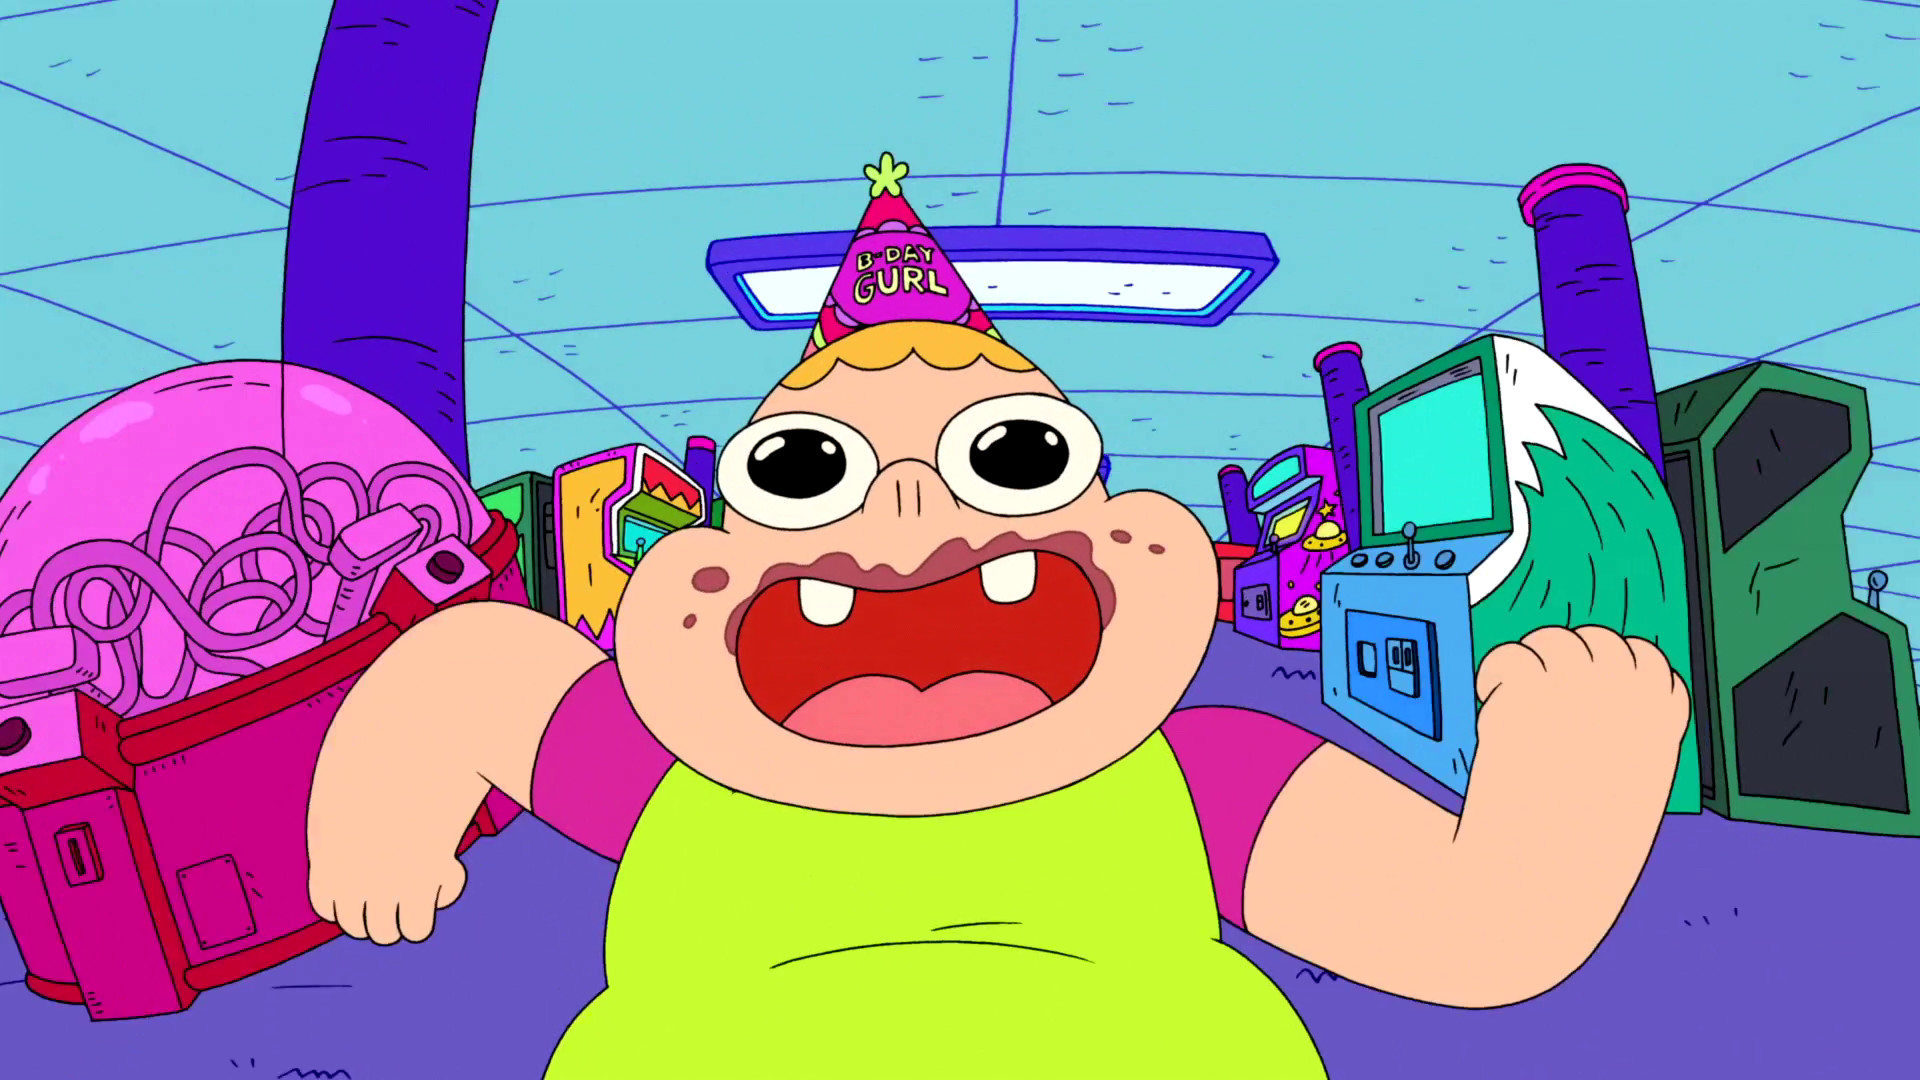 1920x1080 Image - Vlcsnap-2014-04-05-17h29m16s92.png | Clarence Wiki | FANDOM powered  by Wikia